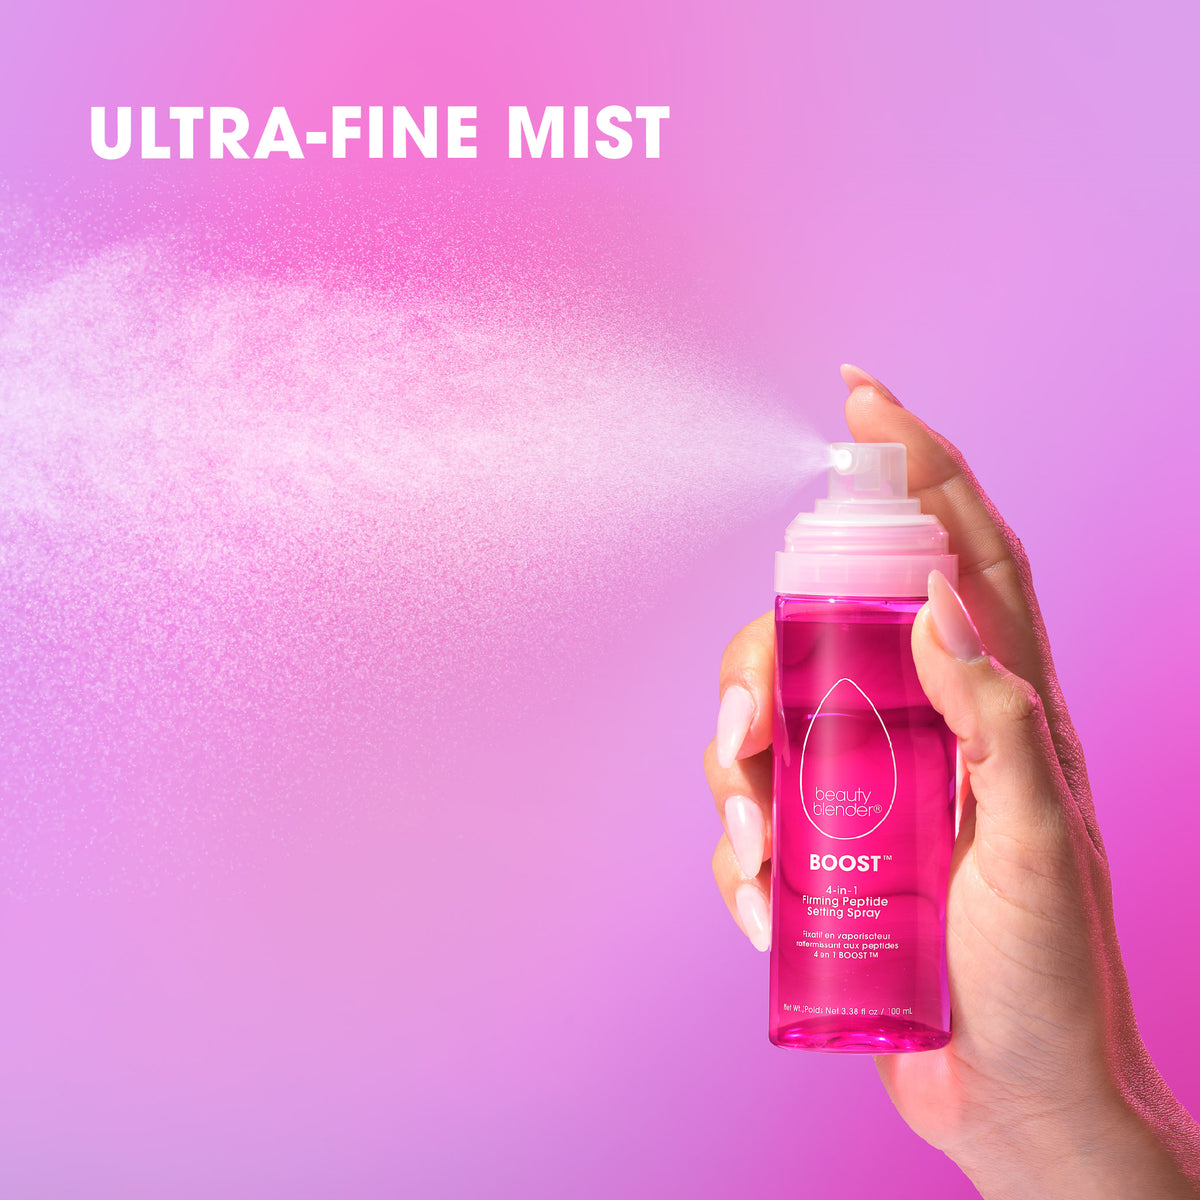 Boost™ 4-in-1 Firming Peptide 18-Hour Setting Spray.